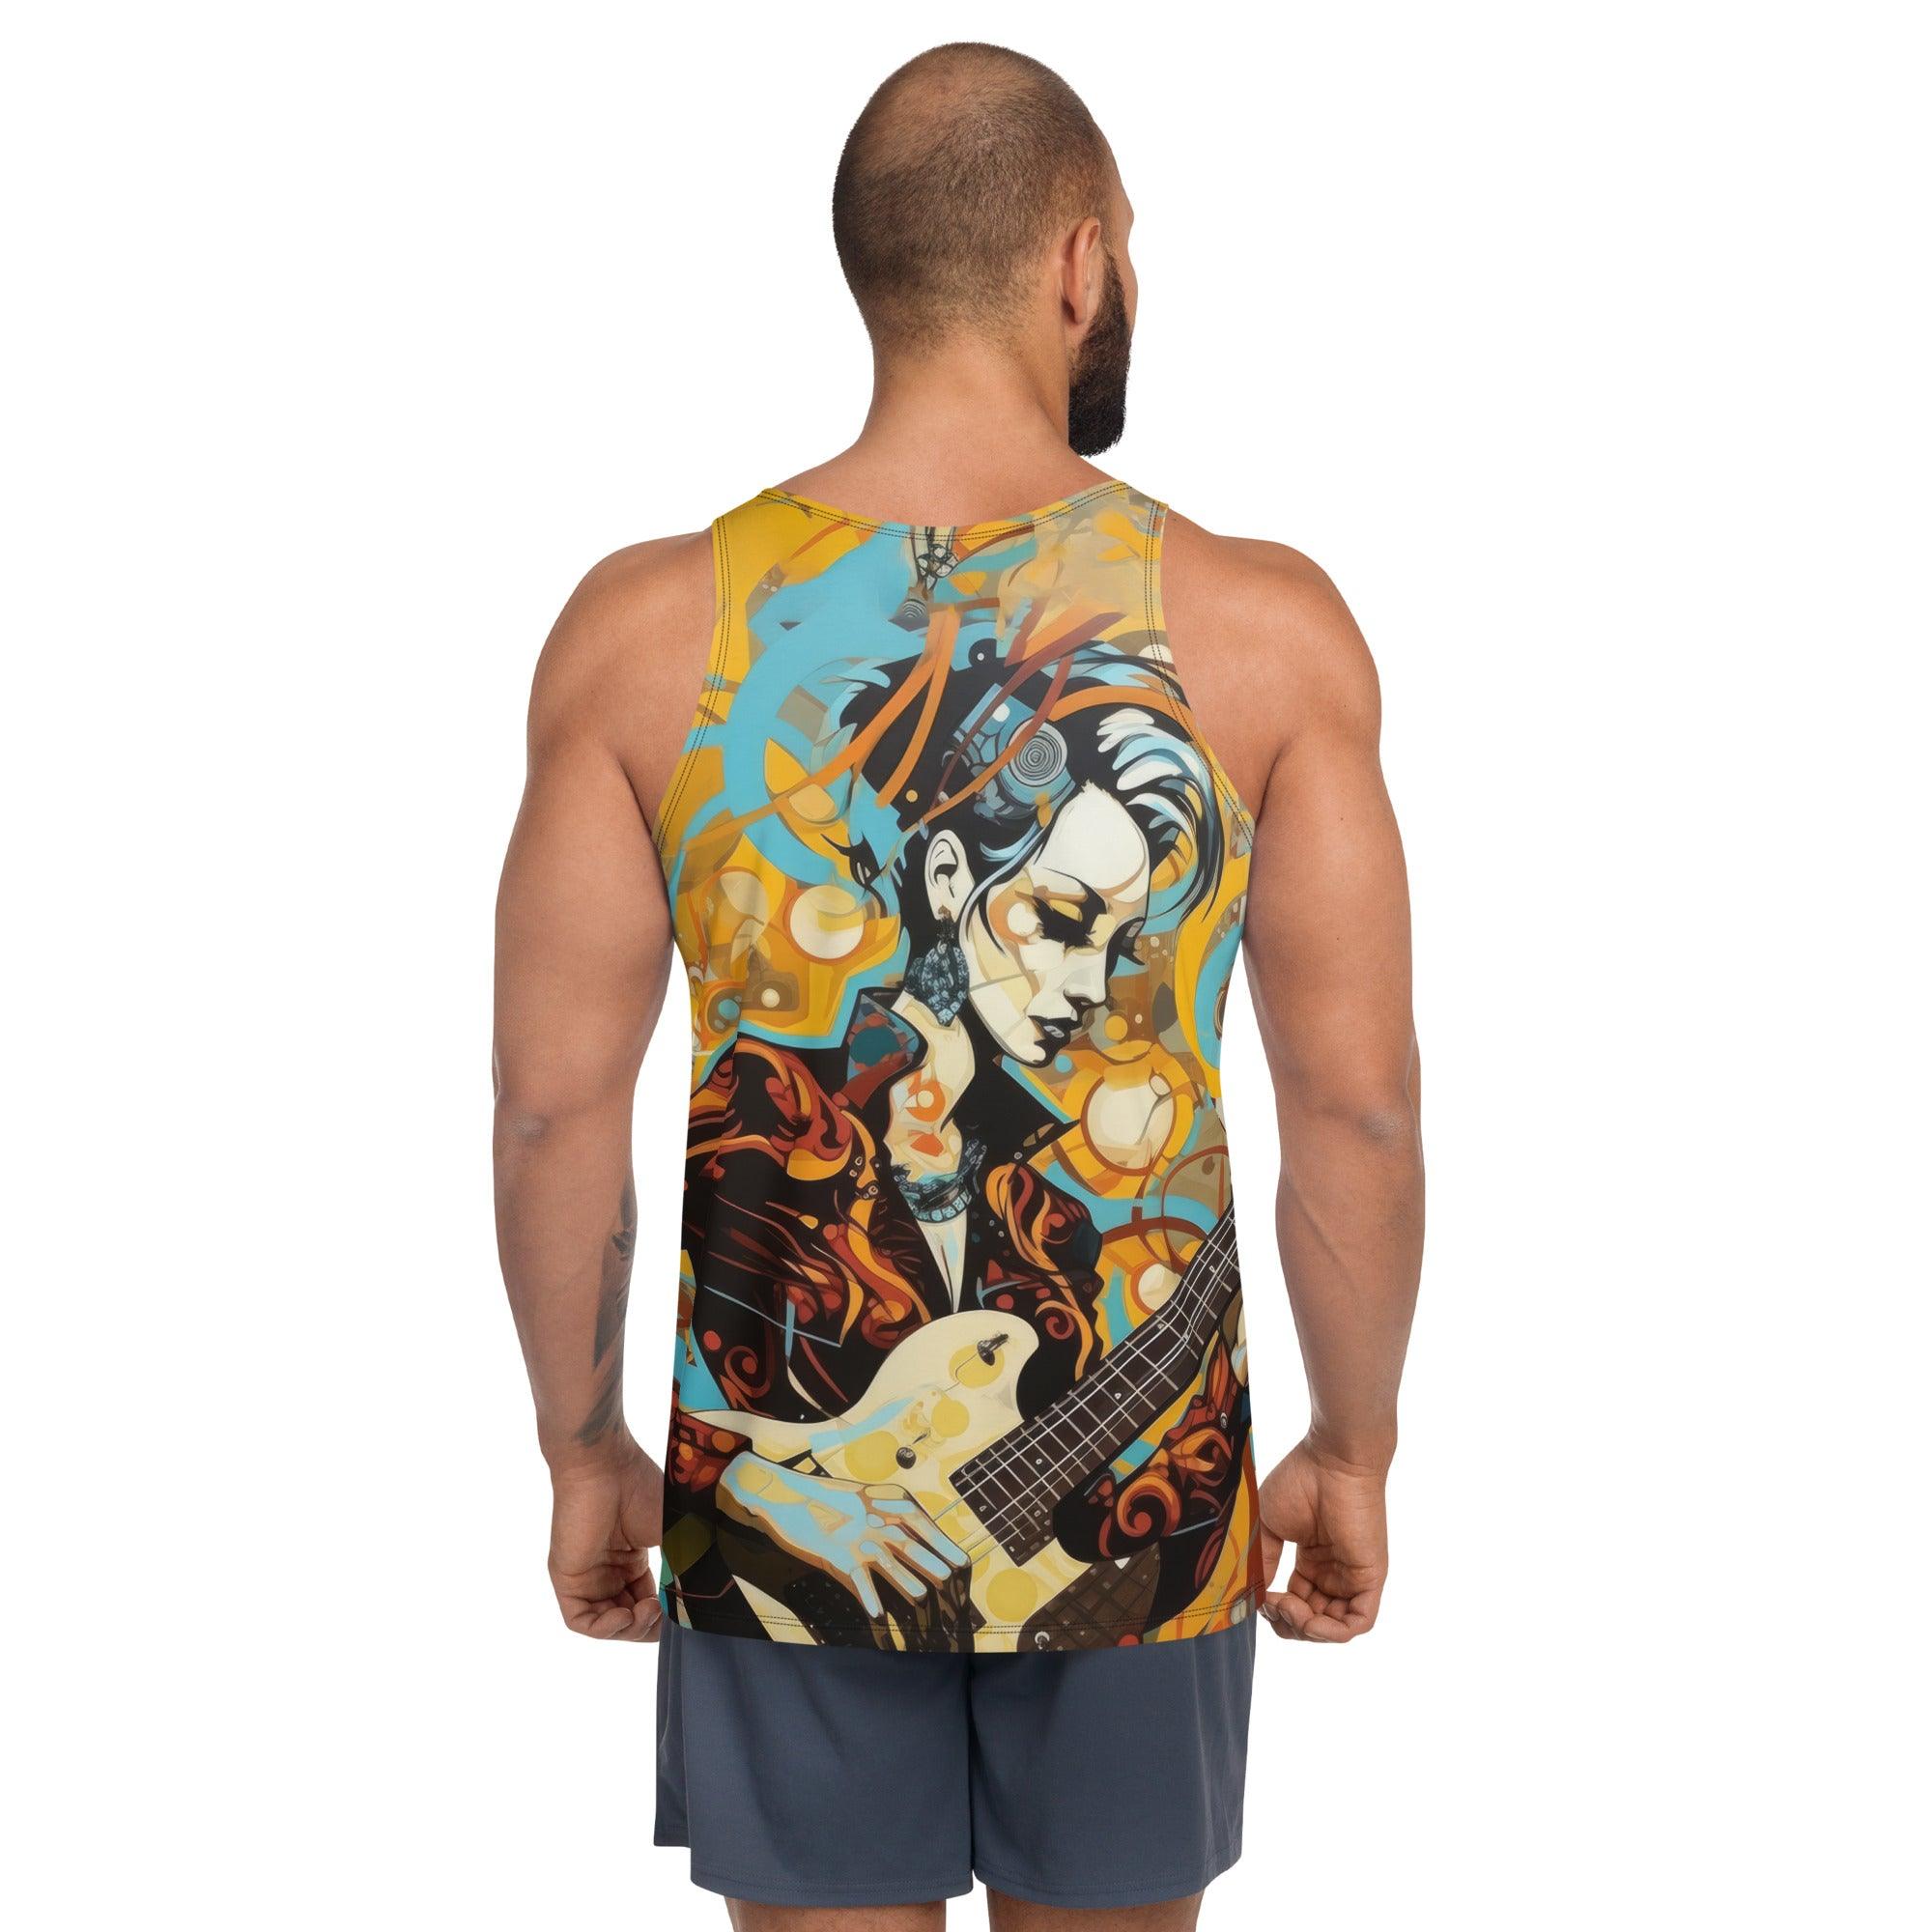 Melodies Heal The HMelodies Heal the Heart Unisex Tank Topeart Unisex Tank Top - Beyond T-shirts